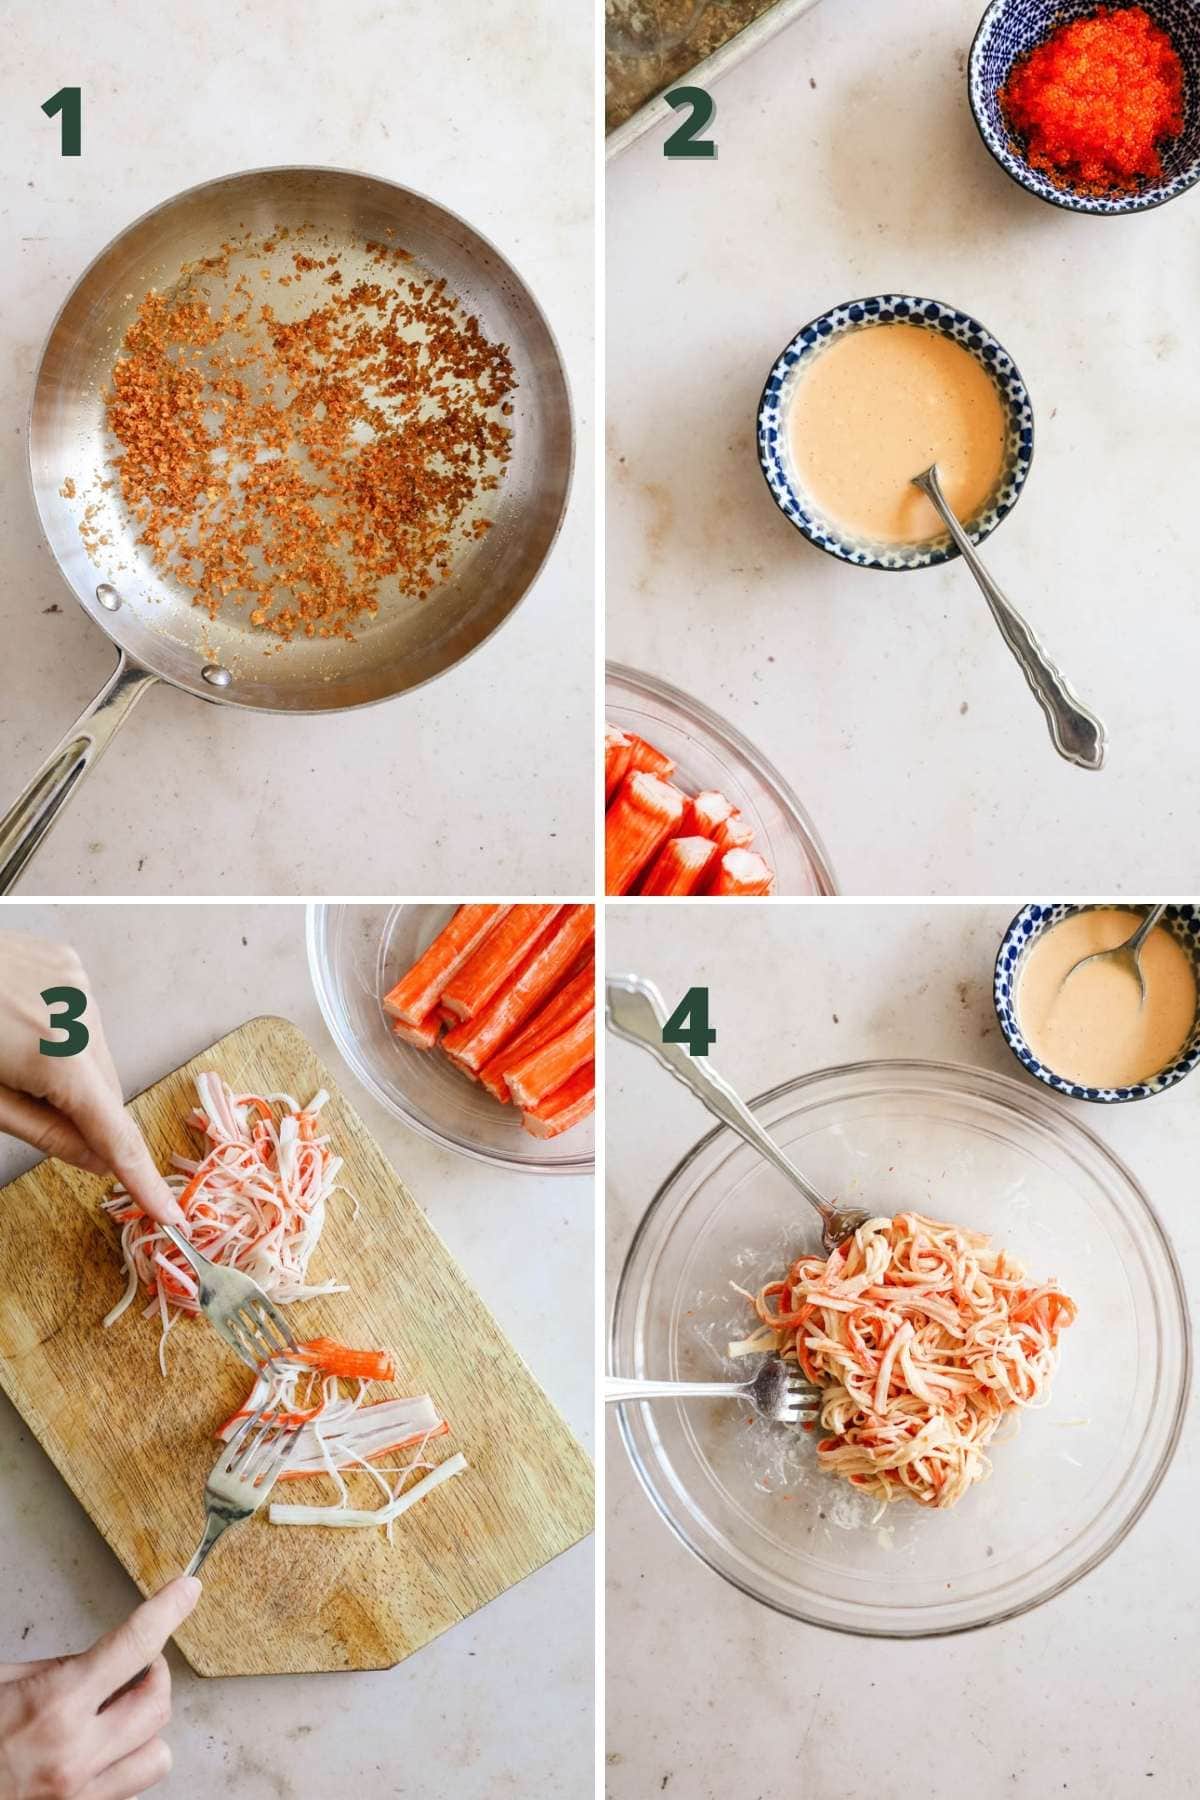 Easy steps to make Spicy Kani Salad, including toasting the panko, making spicy kewpie mayo, and tossing kani with mayo.